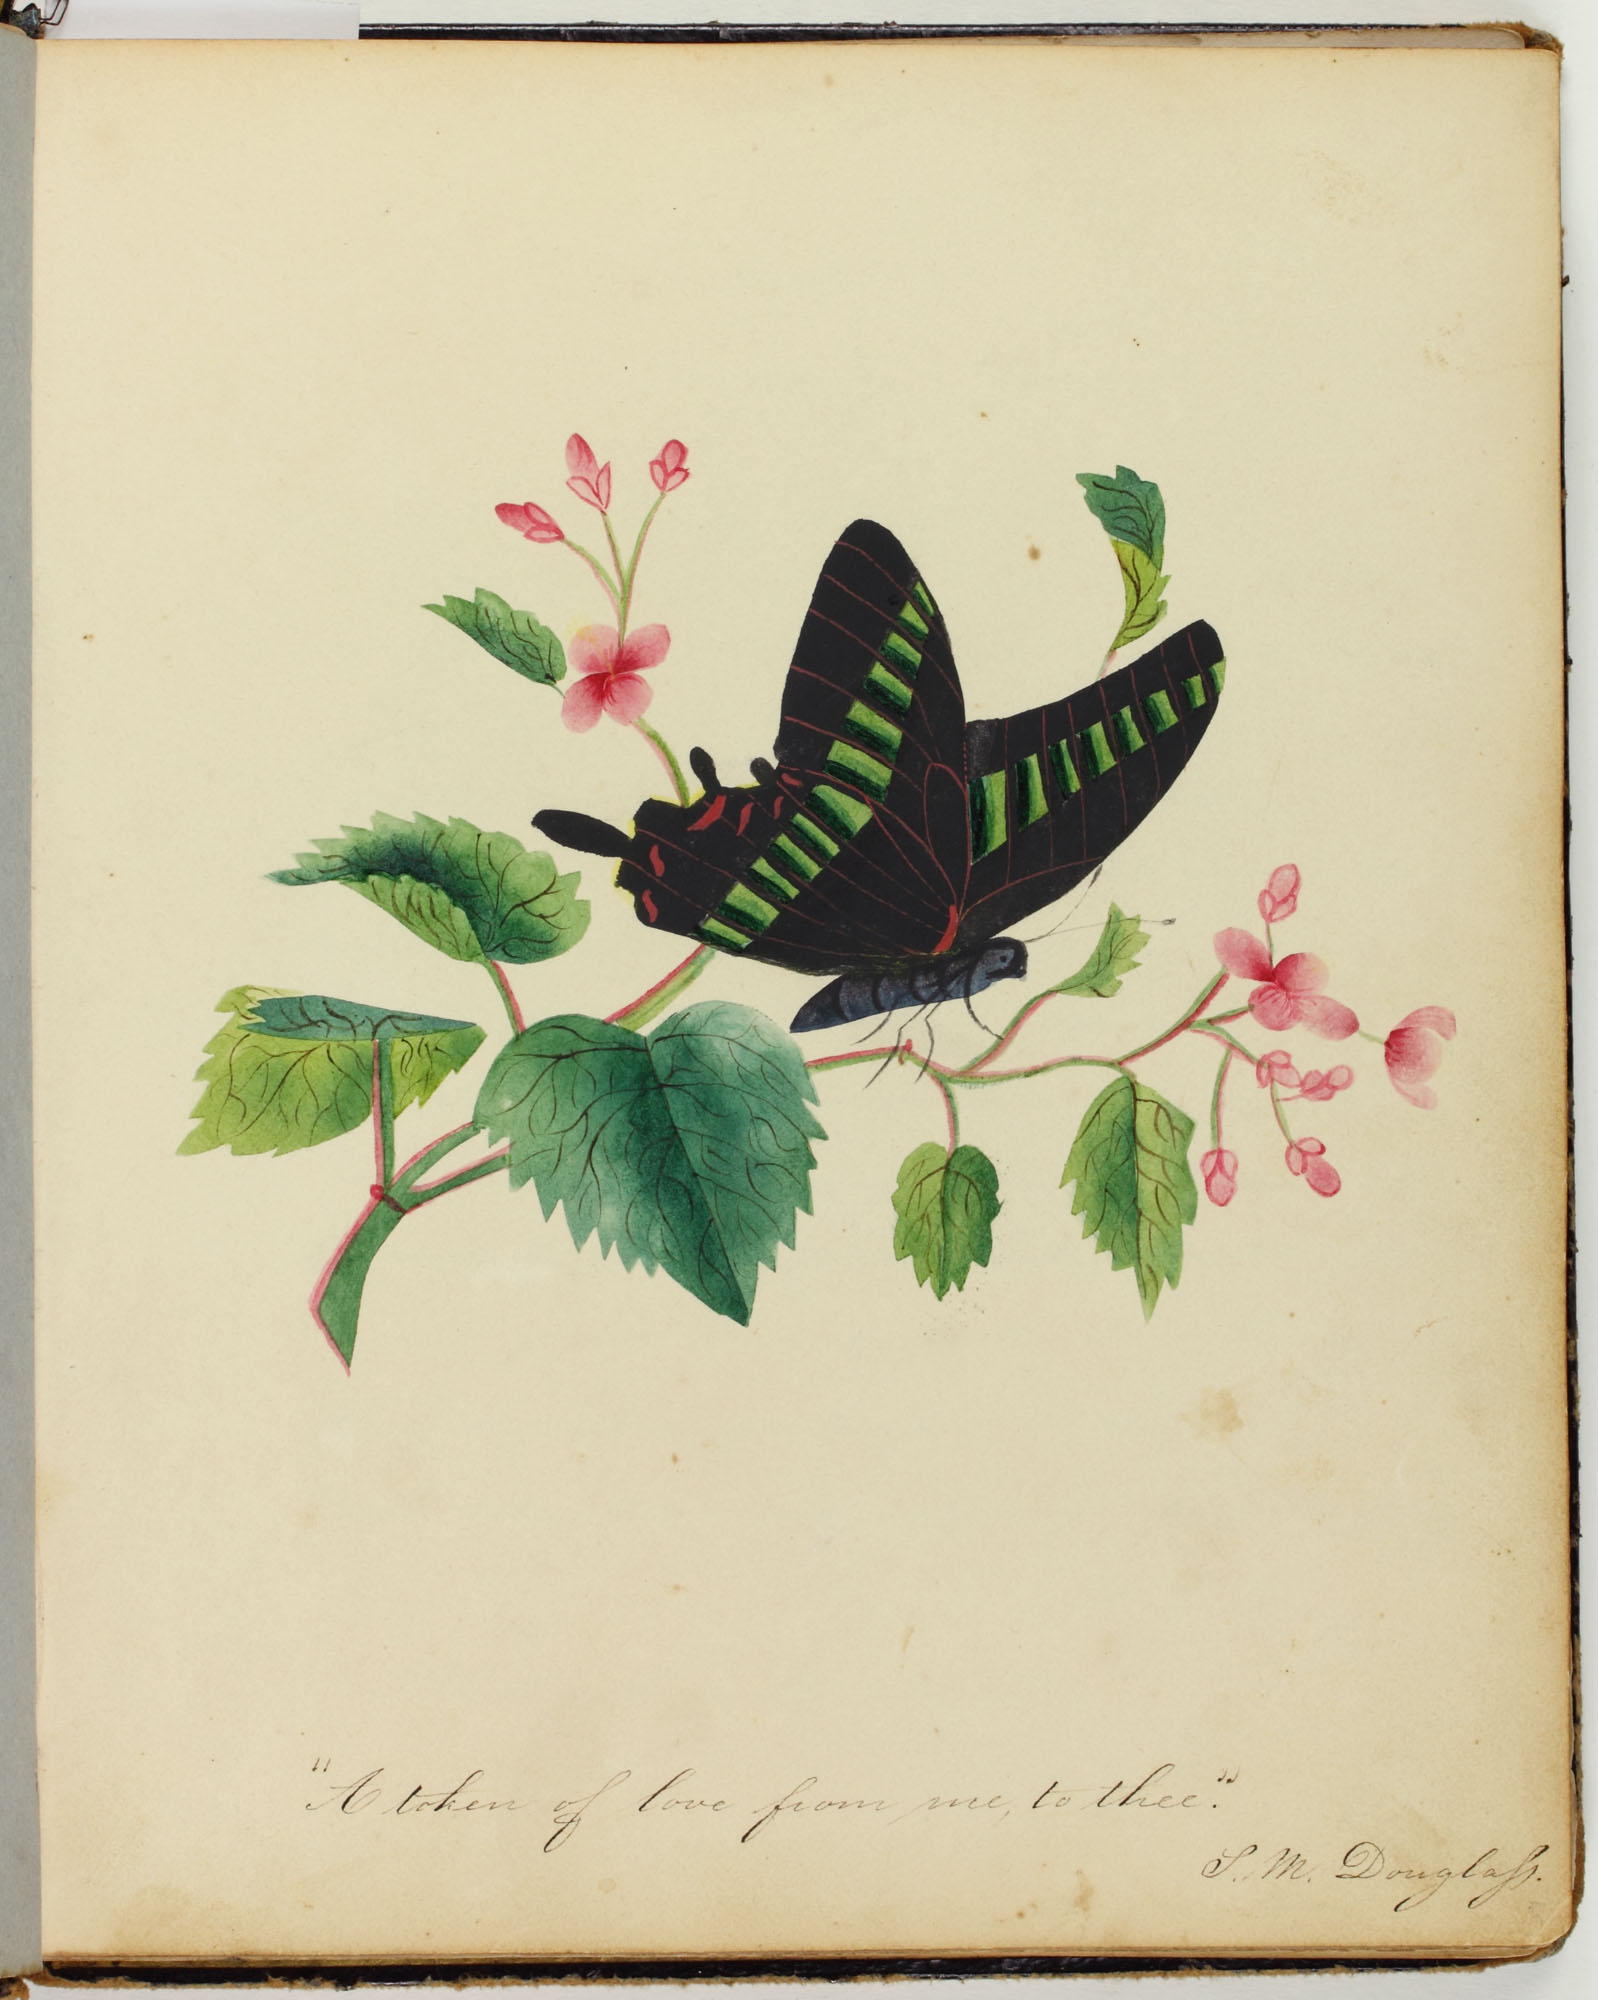 Fig. 1 Sarah Mapps Douglass, “A token of love from me to thee,” Amy Matilda Cassey Album, 1833-1856. Watercolor, undated. Library Company of Philadelphia.